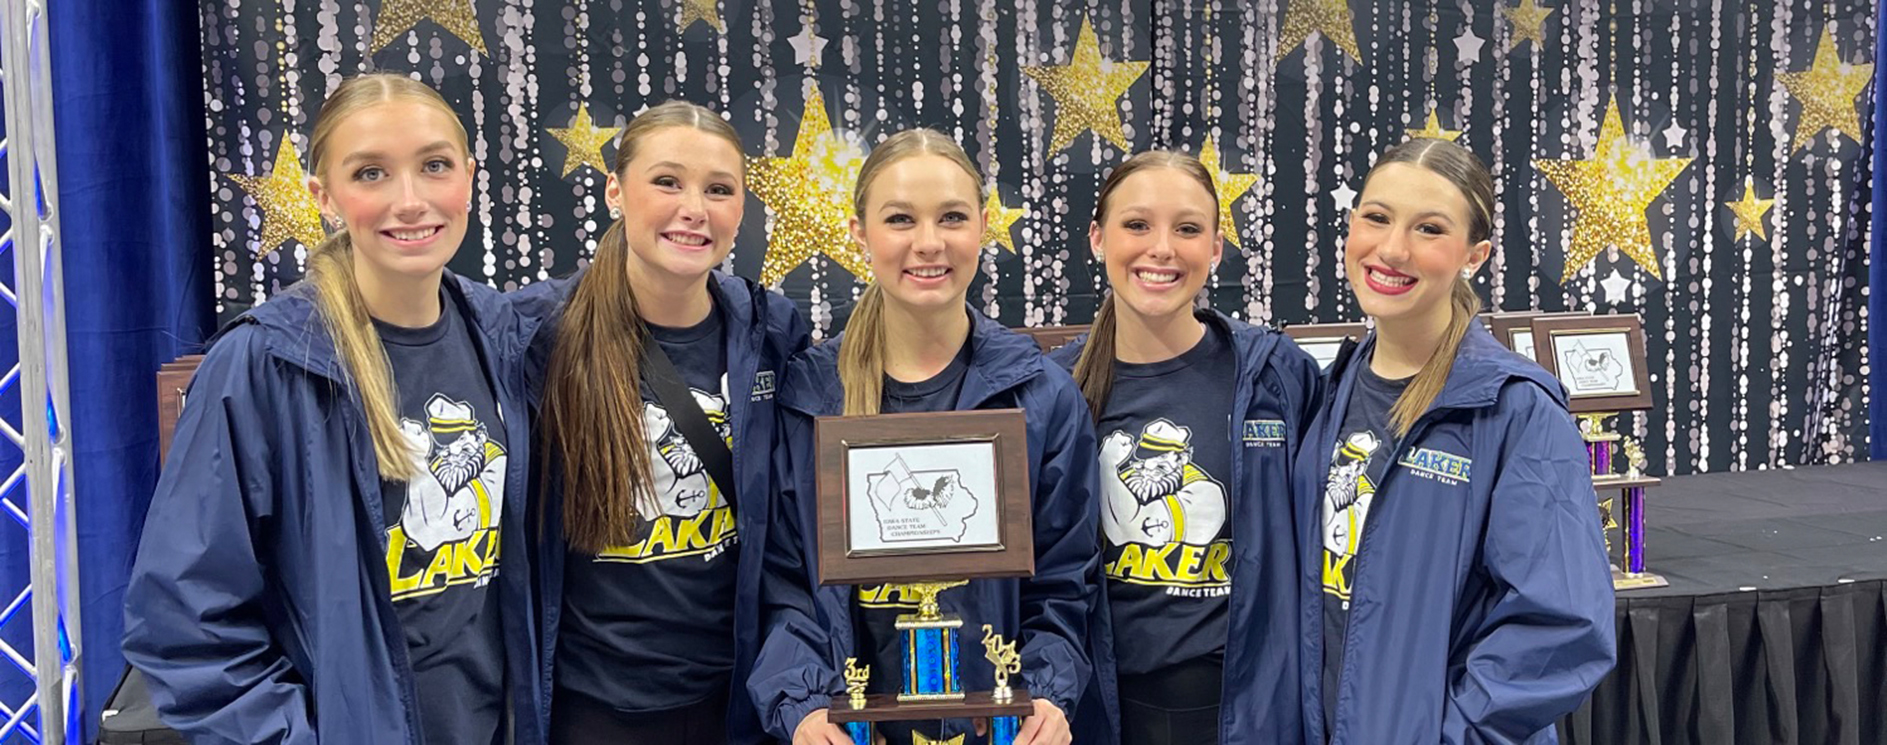 Iowa Lakes Dance Team brings home 3rd in the state